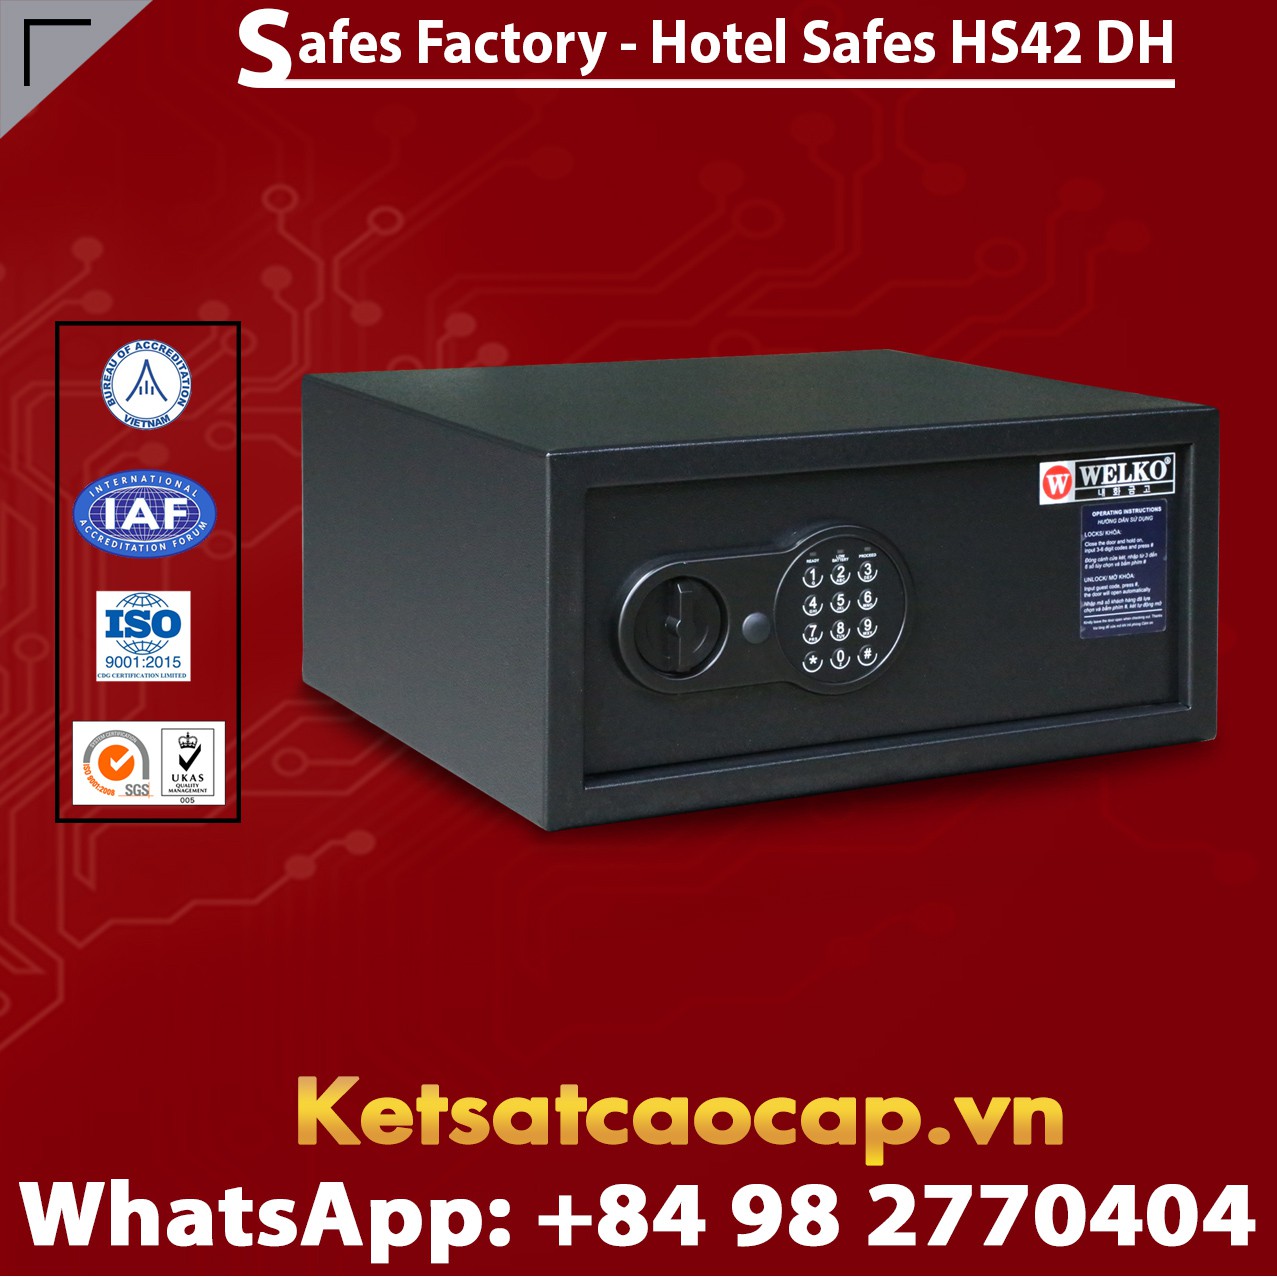 Hotel Room Security Manufacturers